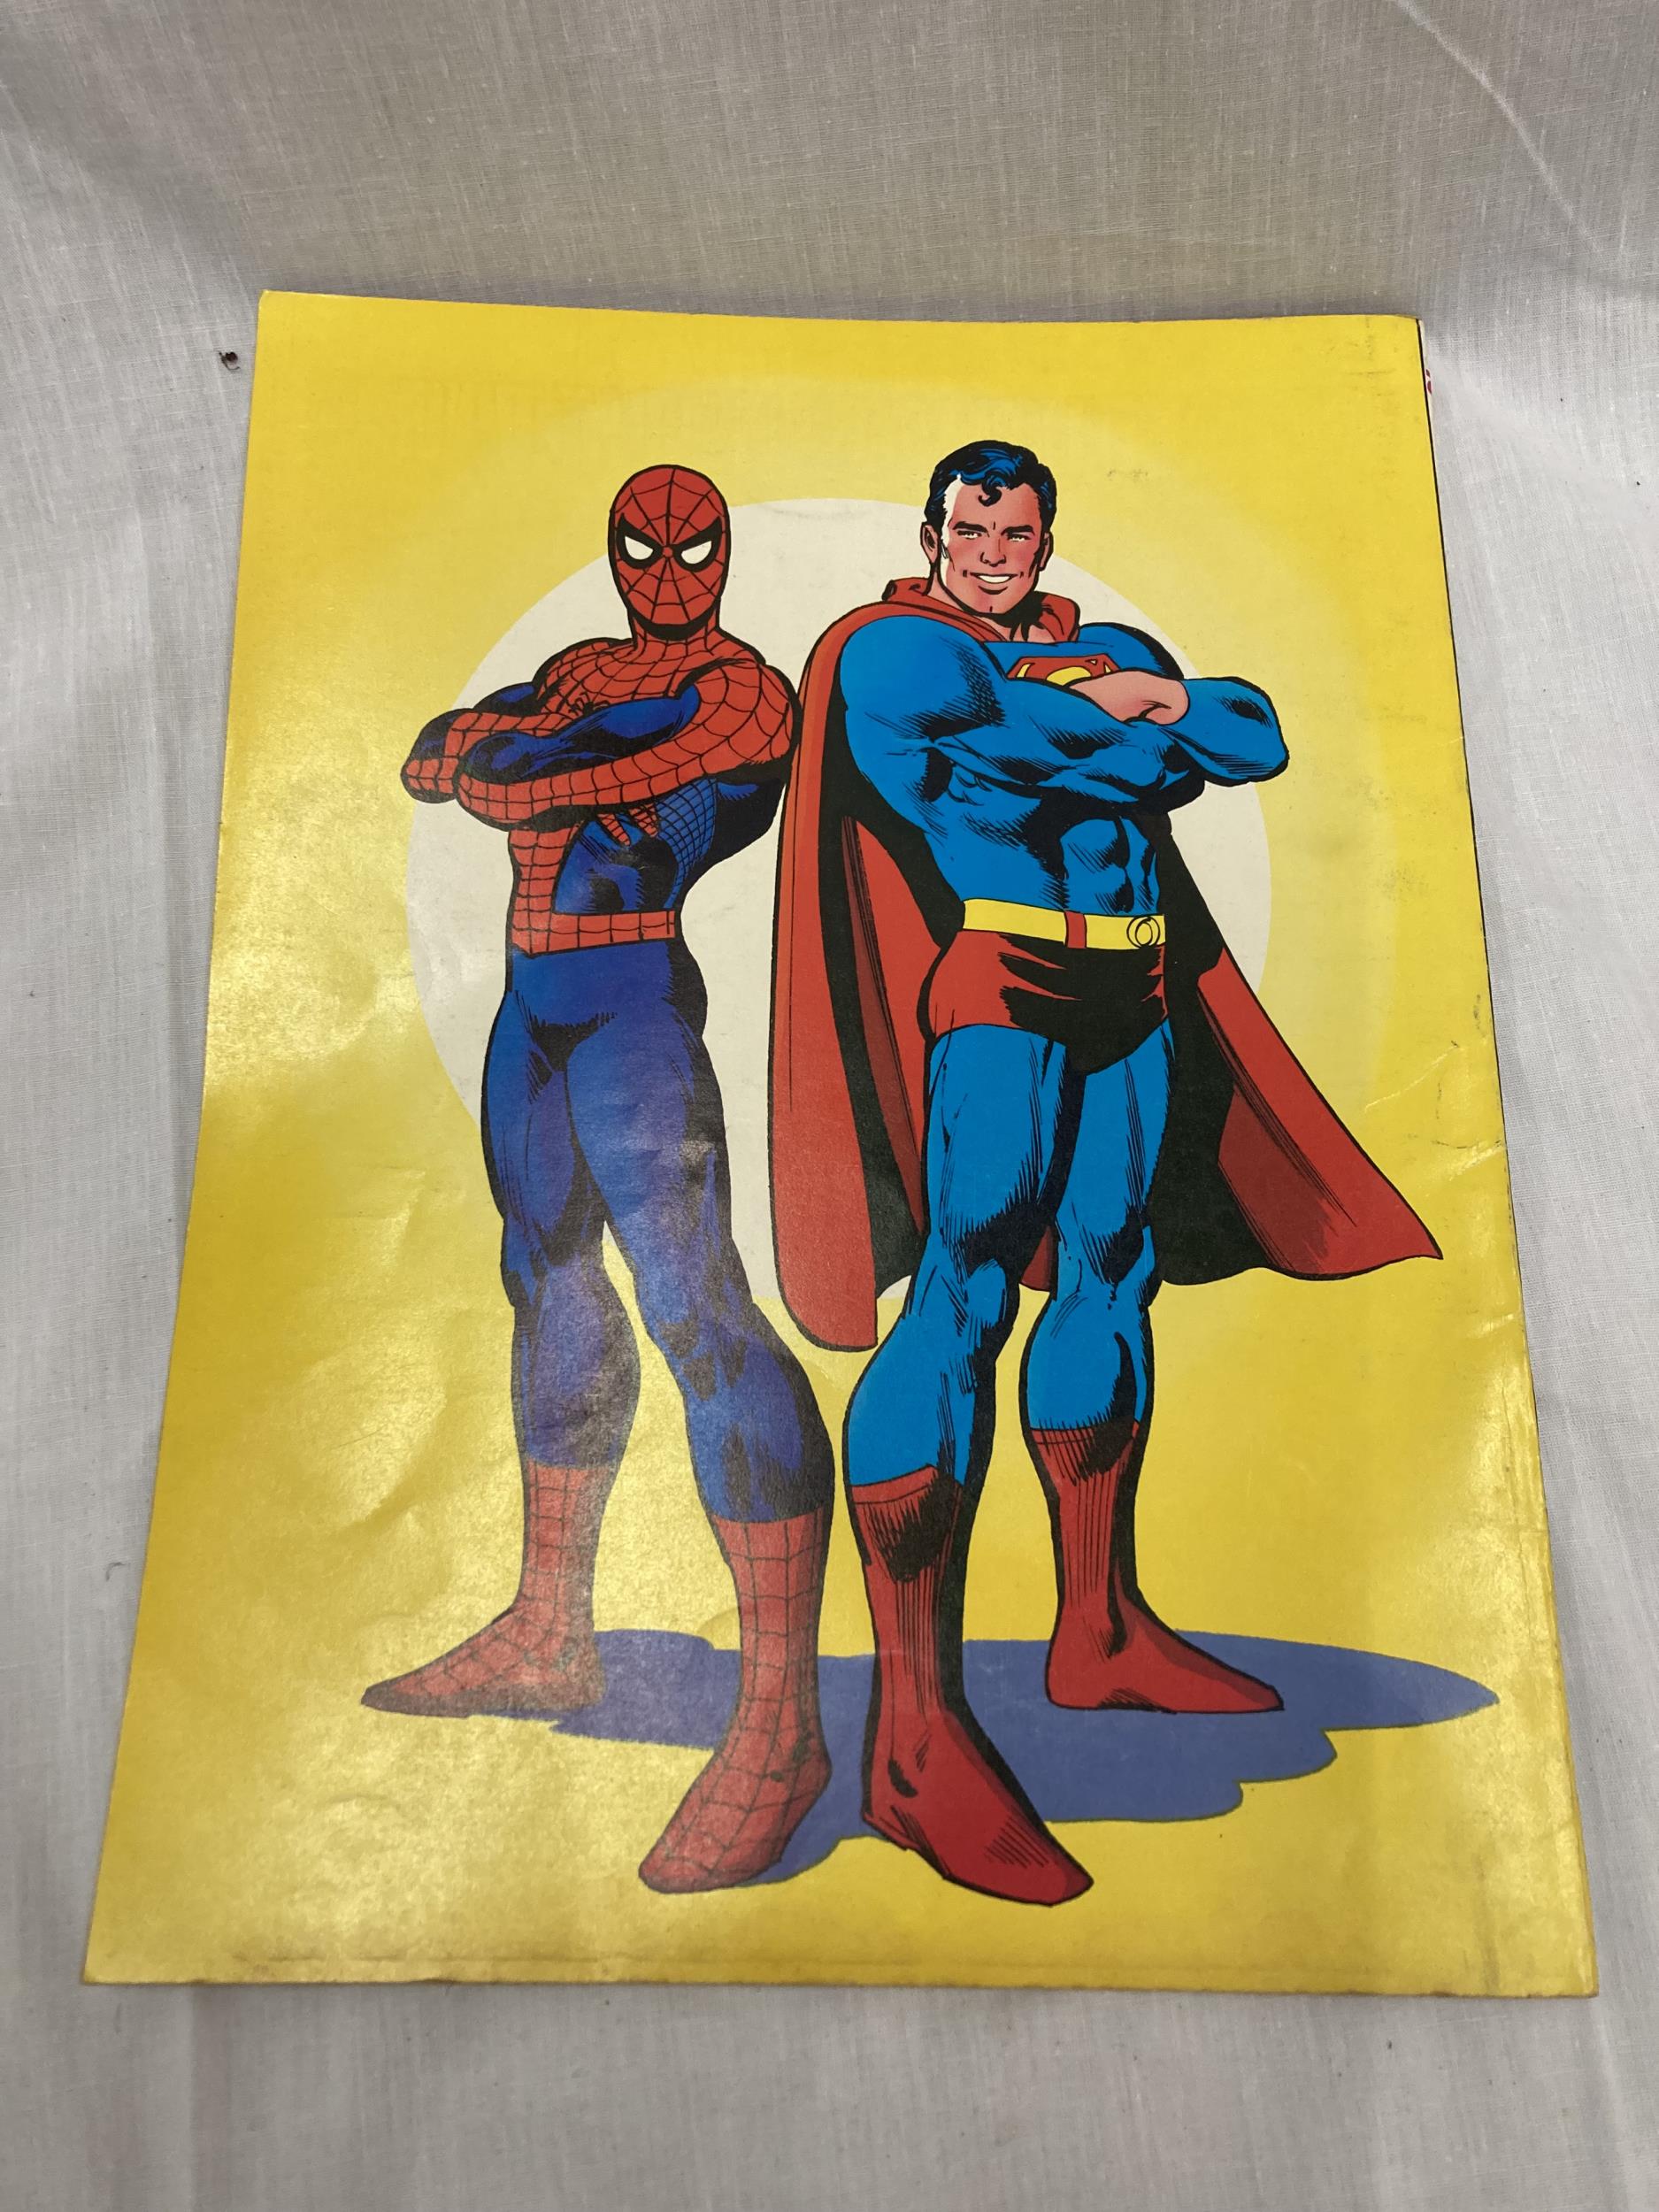 A DC AND MARVEL VINTAGE COMIC THE BATTLE OF THE CENTURY SUPERMAN V SPIDERMAN 1976 - Image 2 of 6